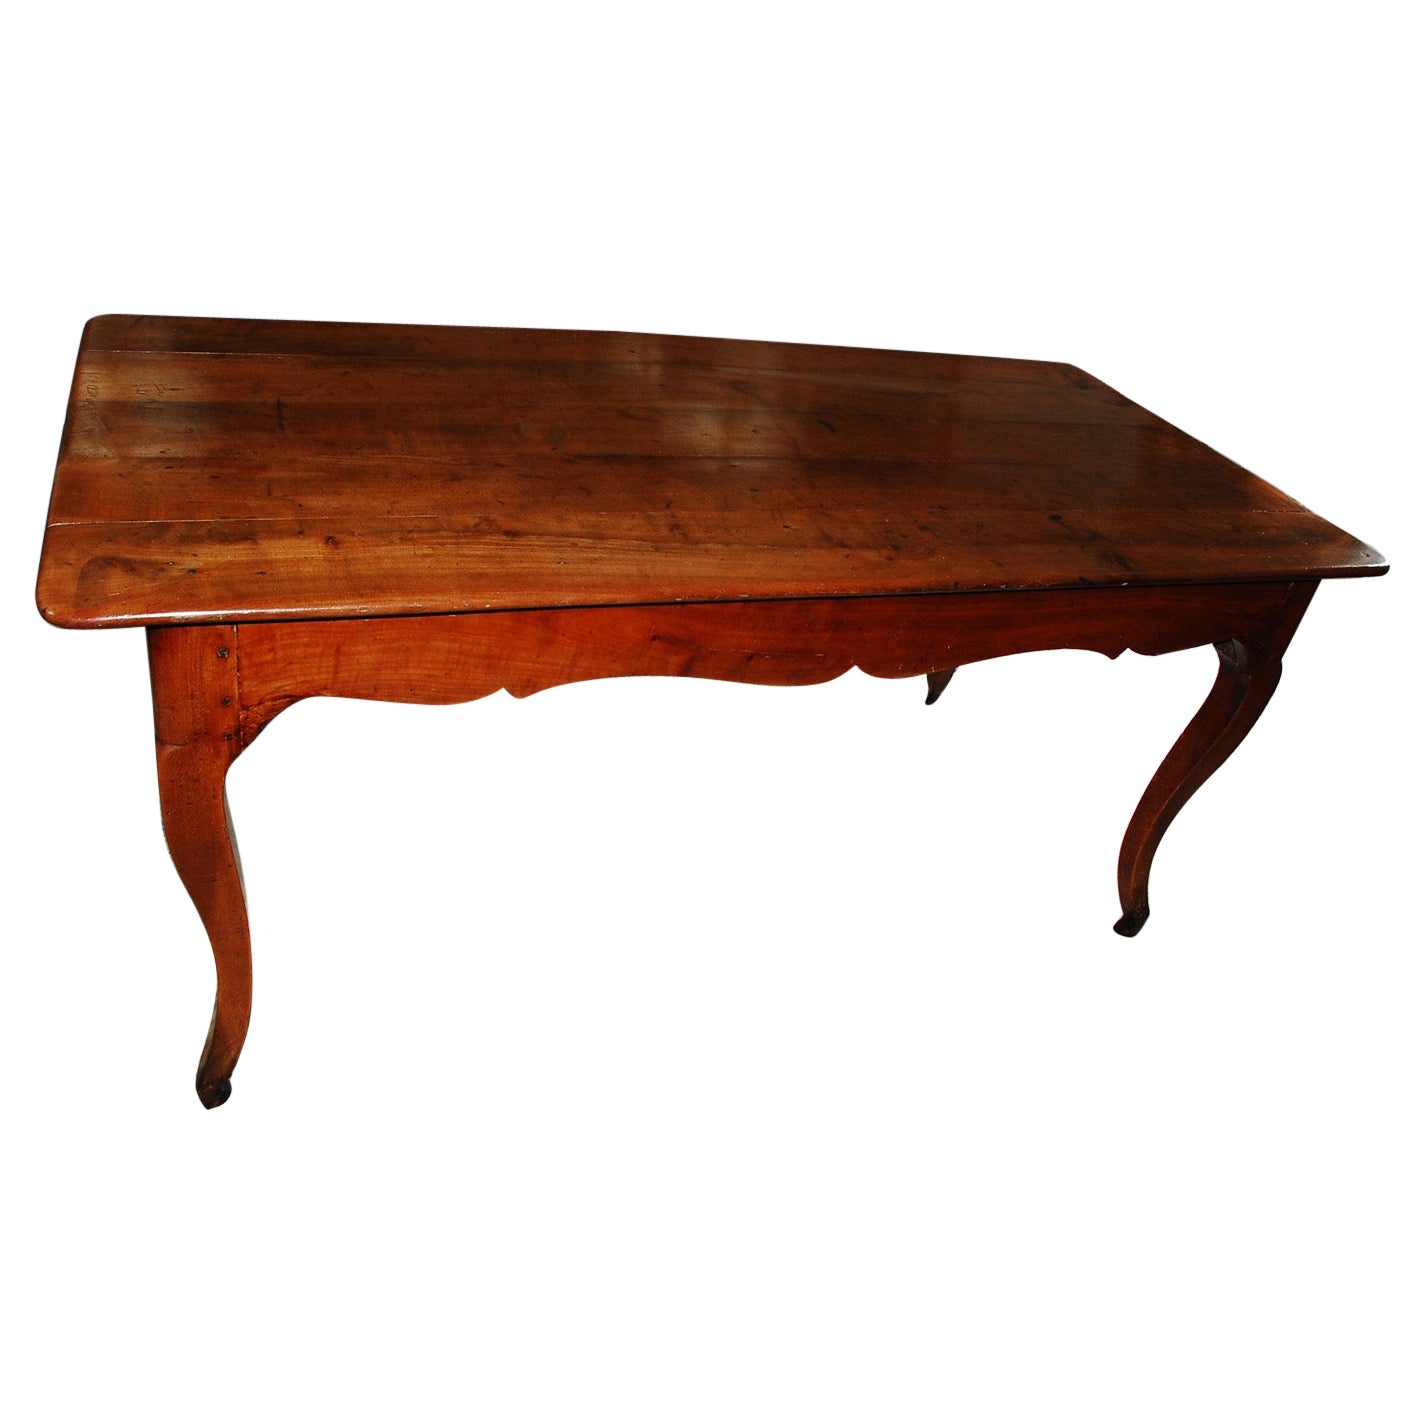 French Early 19th Century Farmhouse Table in Cherry with Cabriole Legs